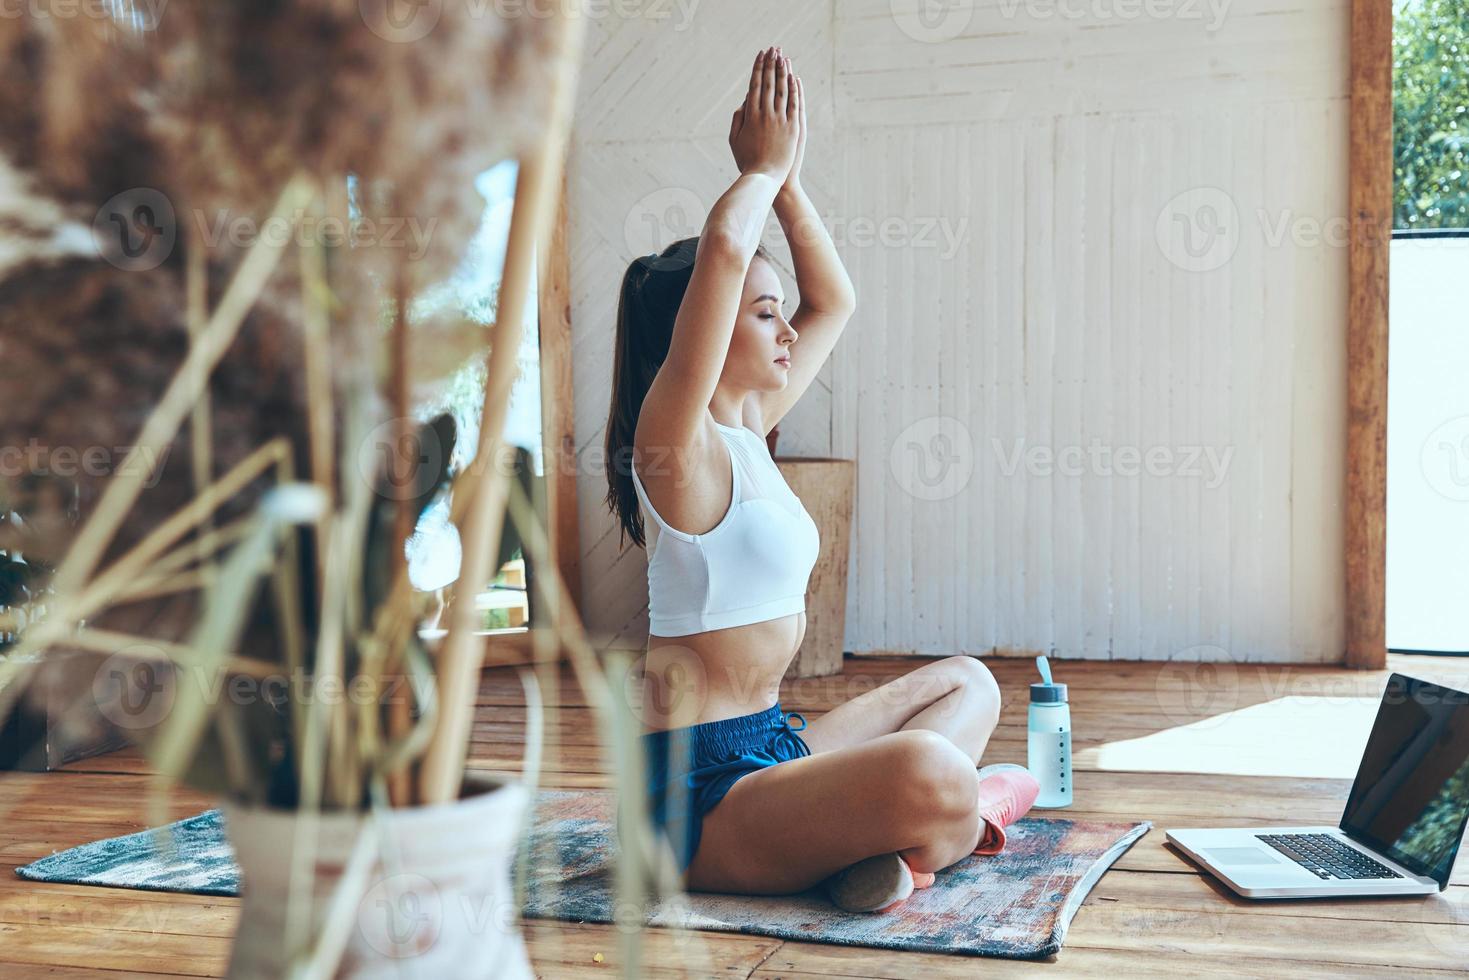 Beautiful young woman in sports clothing practicing yoga on patio with laptop laying near her photo